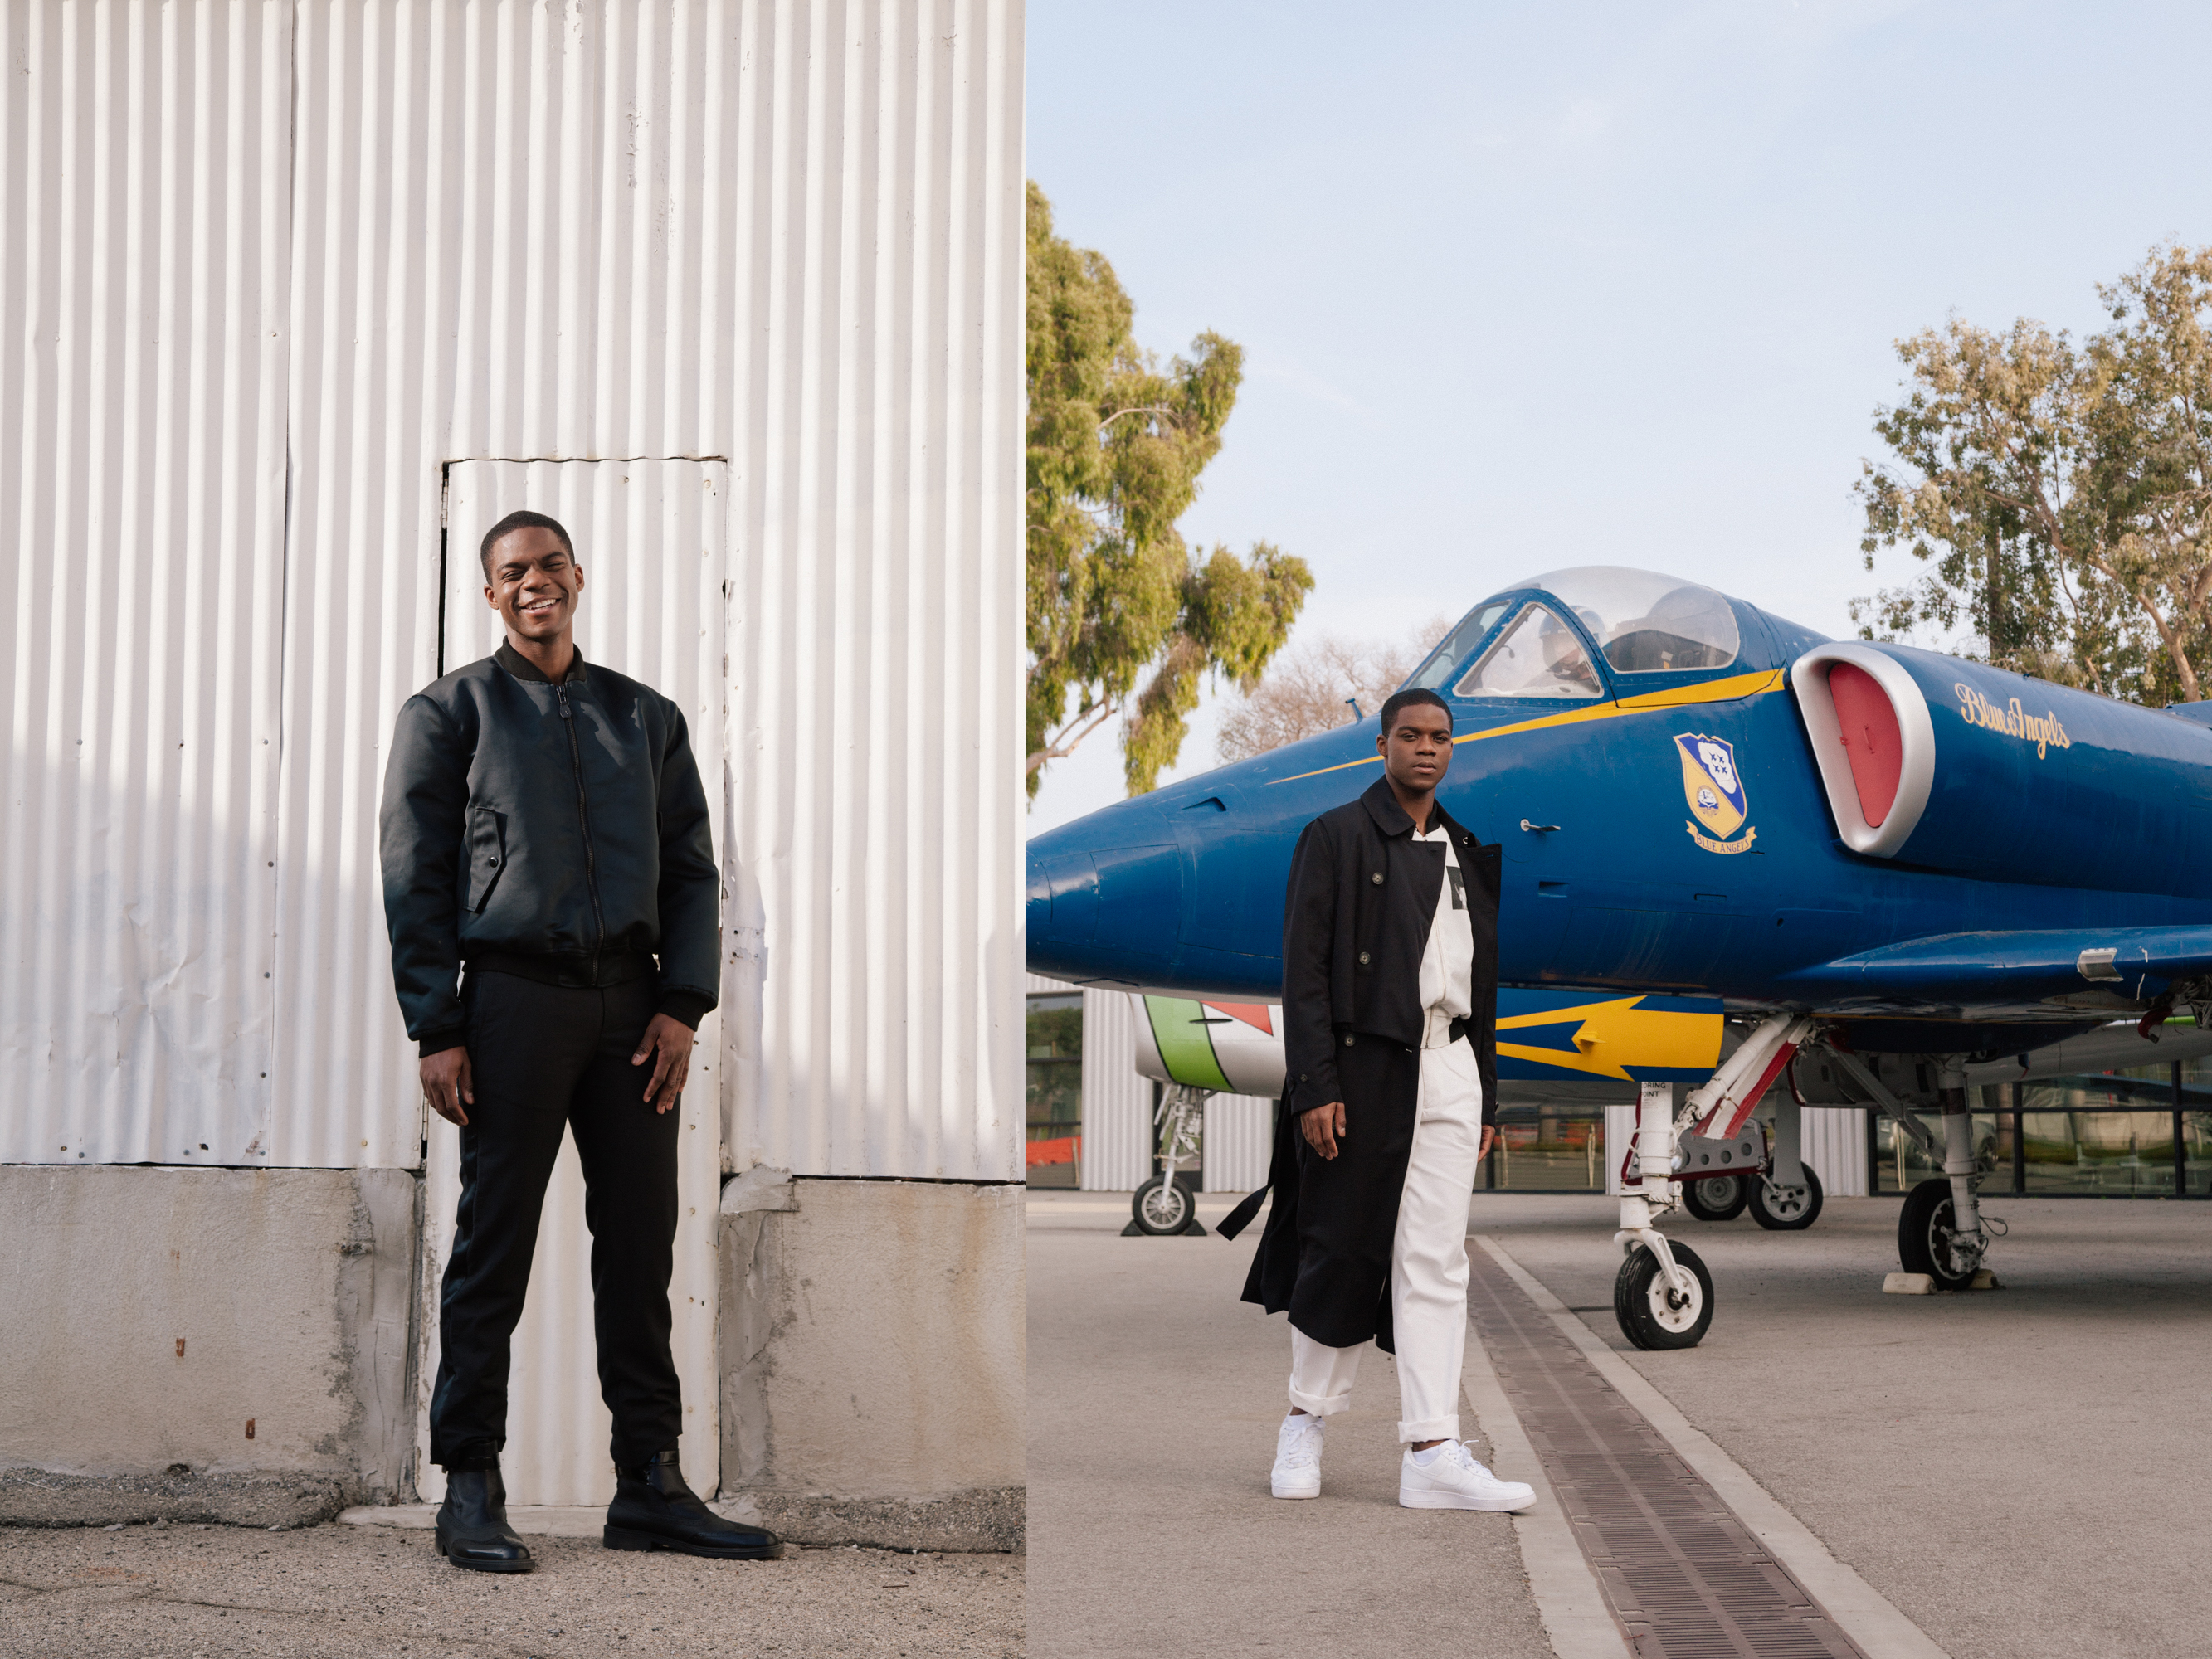 Left: Vintage jacket by Givenchy. Trousers and boots by Vivienne Westwood.Right: Trench coat by H&M. Jacket, worn underneath, by Enfants Riches Déprimés. Vintage trousers by Byblos. Sneakers by Nike.